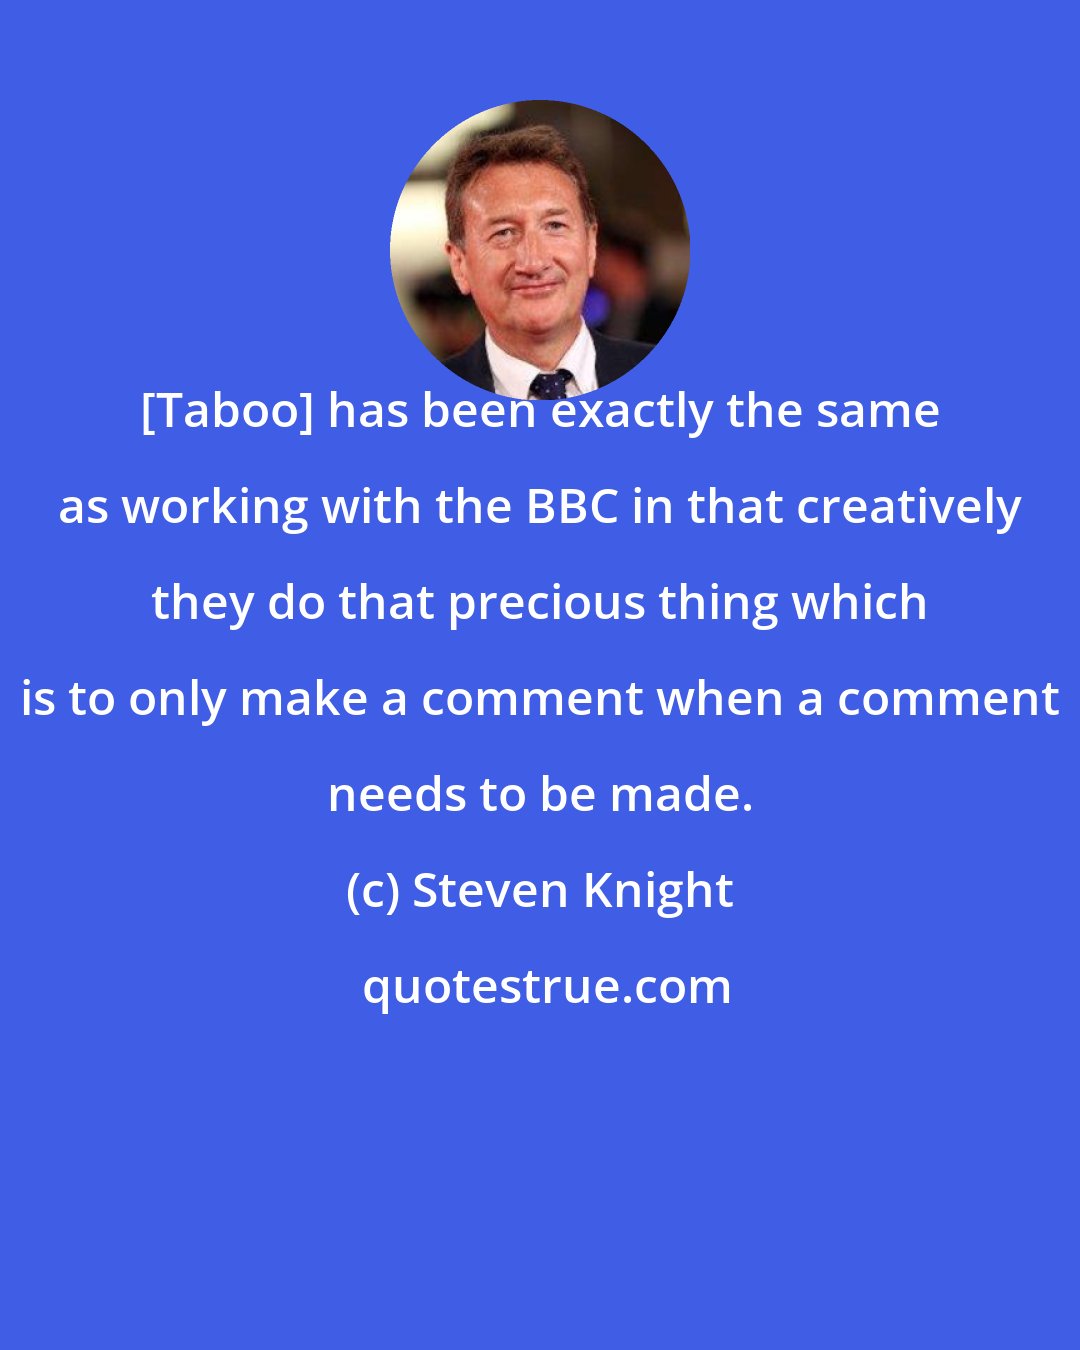 Steven Knight: [Taboo] has been exactly the same as working with the BBC in that creatively they do that precious thing which is to only make a comment when a comment needs to be made.